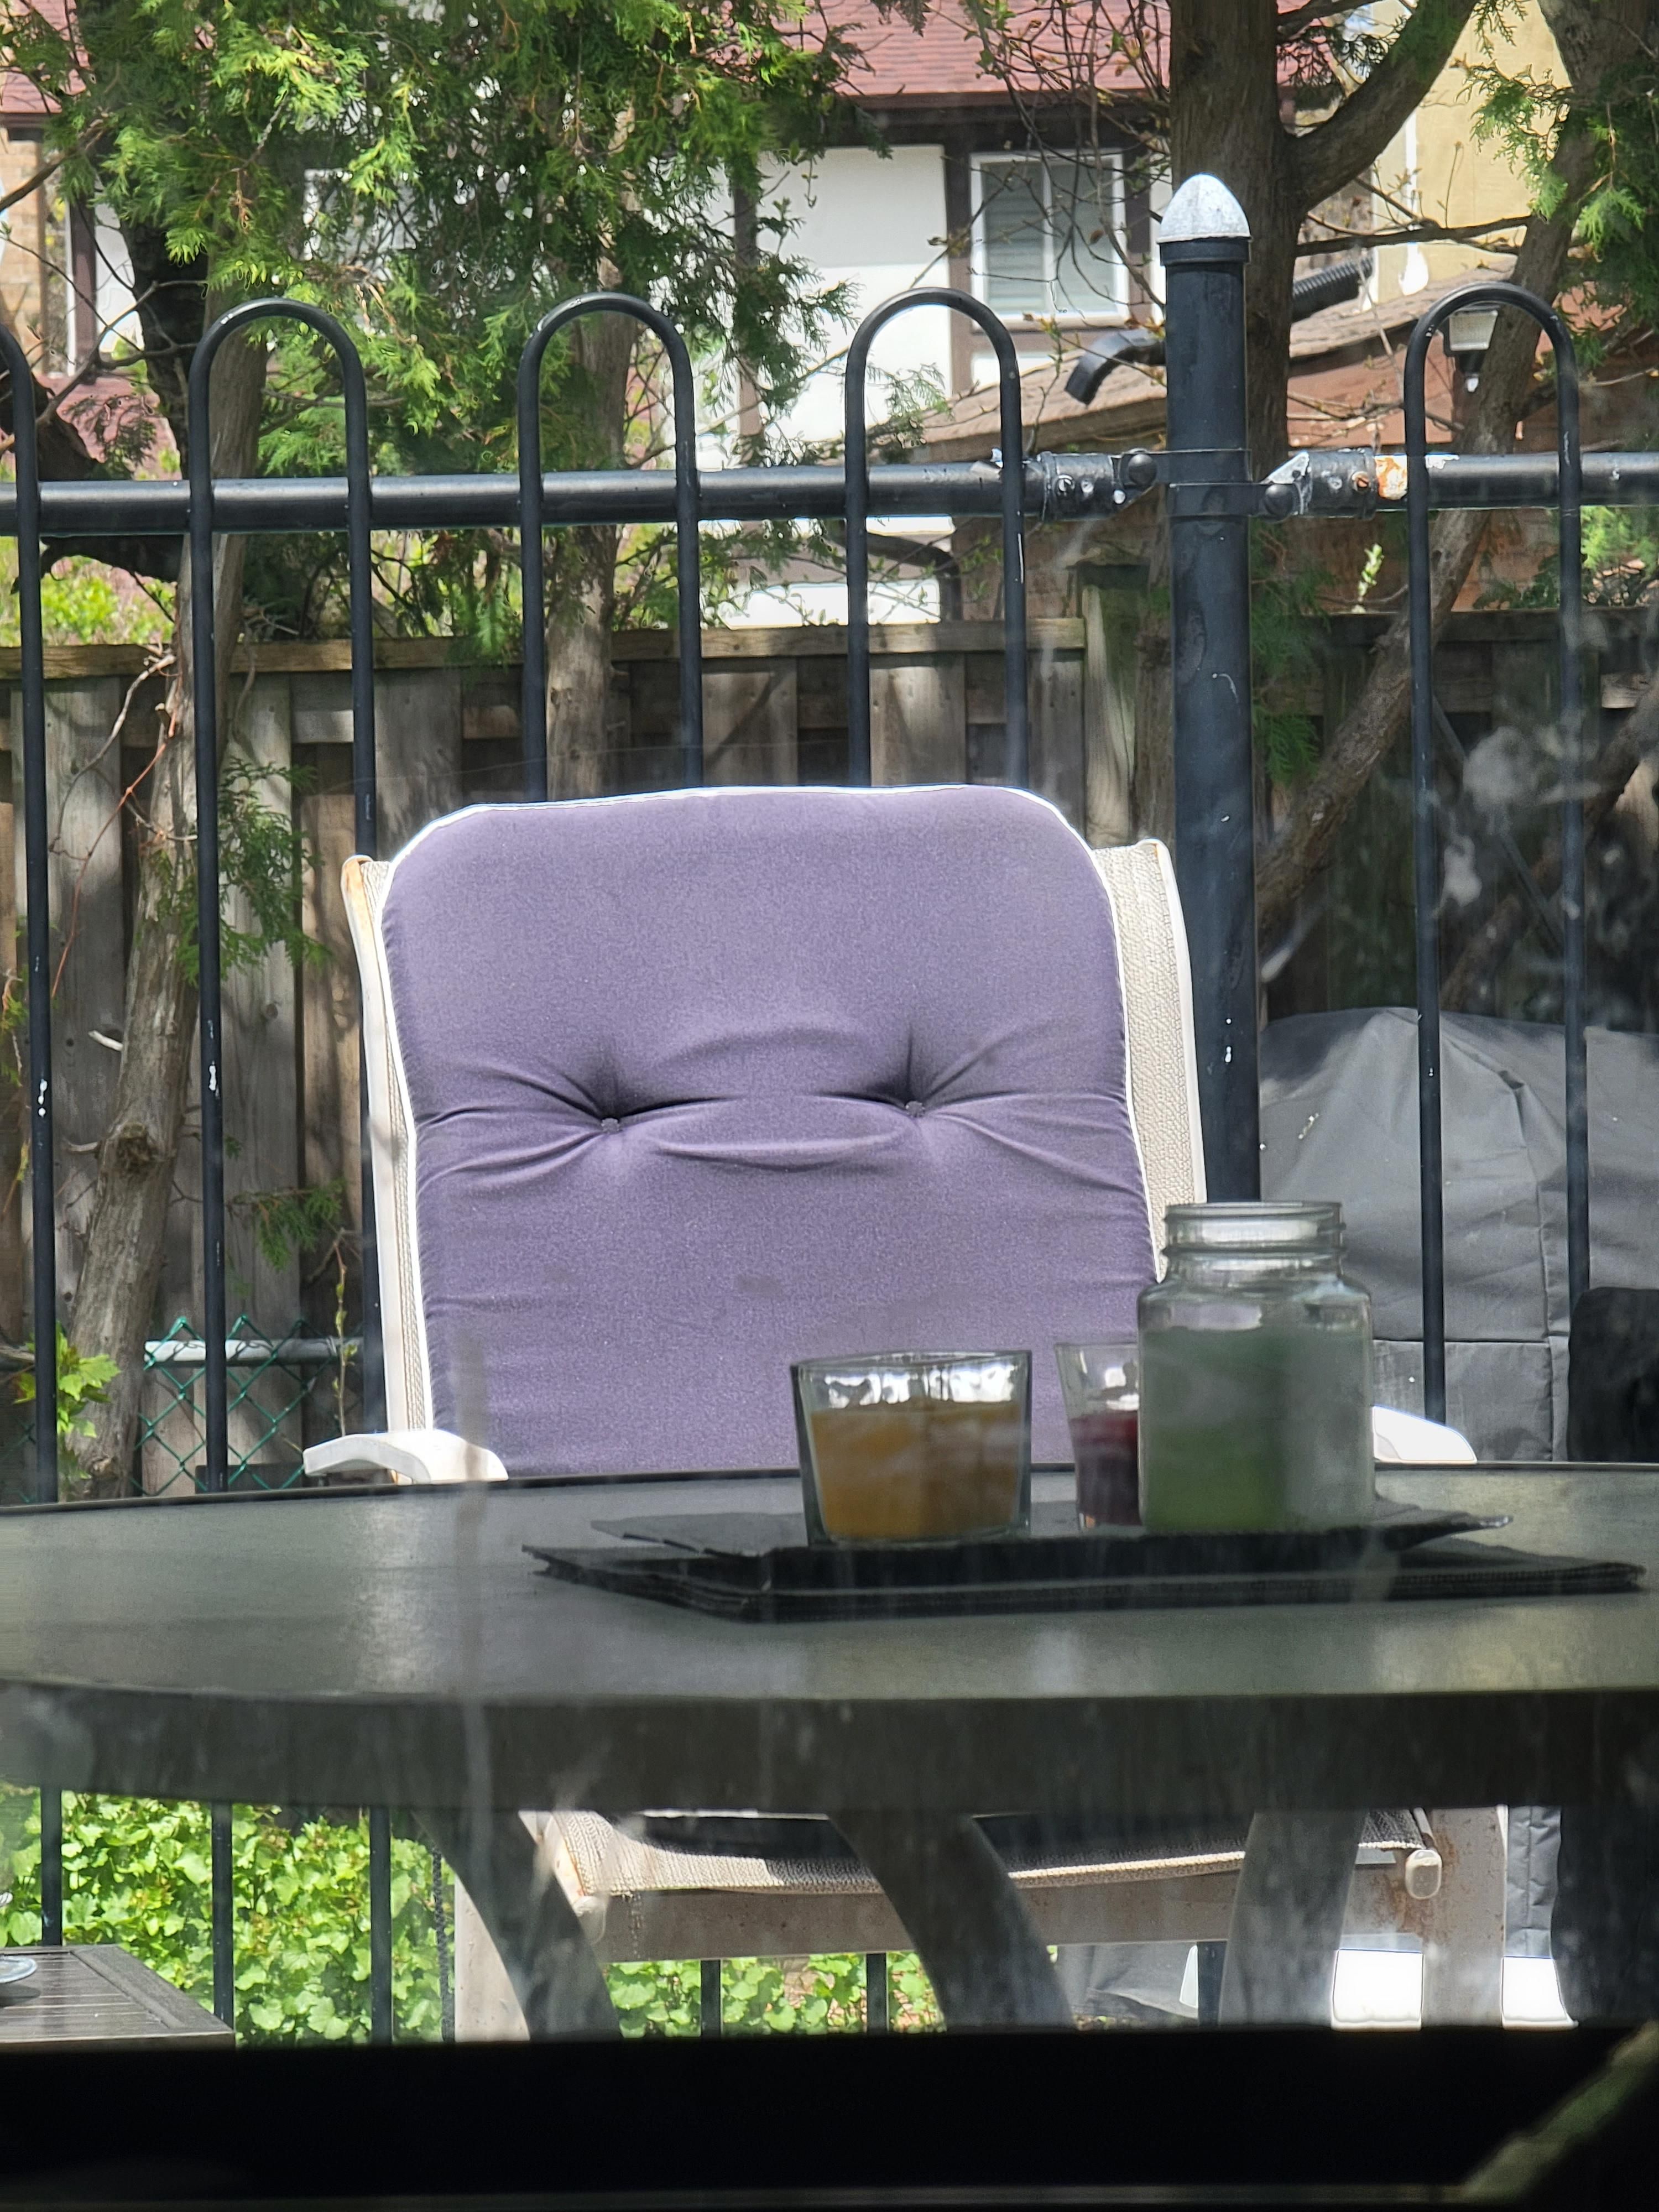 Took an edible and noticed that the patio chair is eyeballing me.